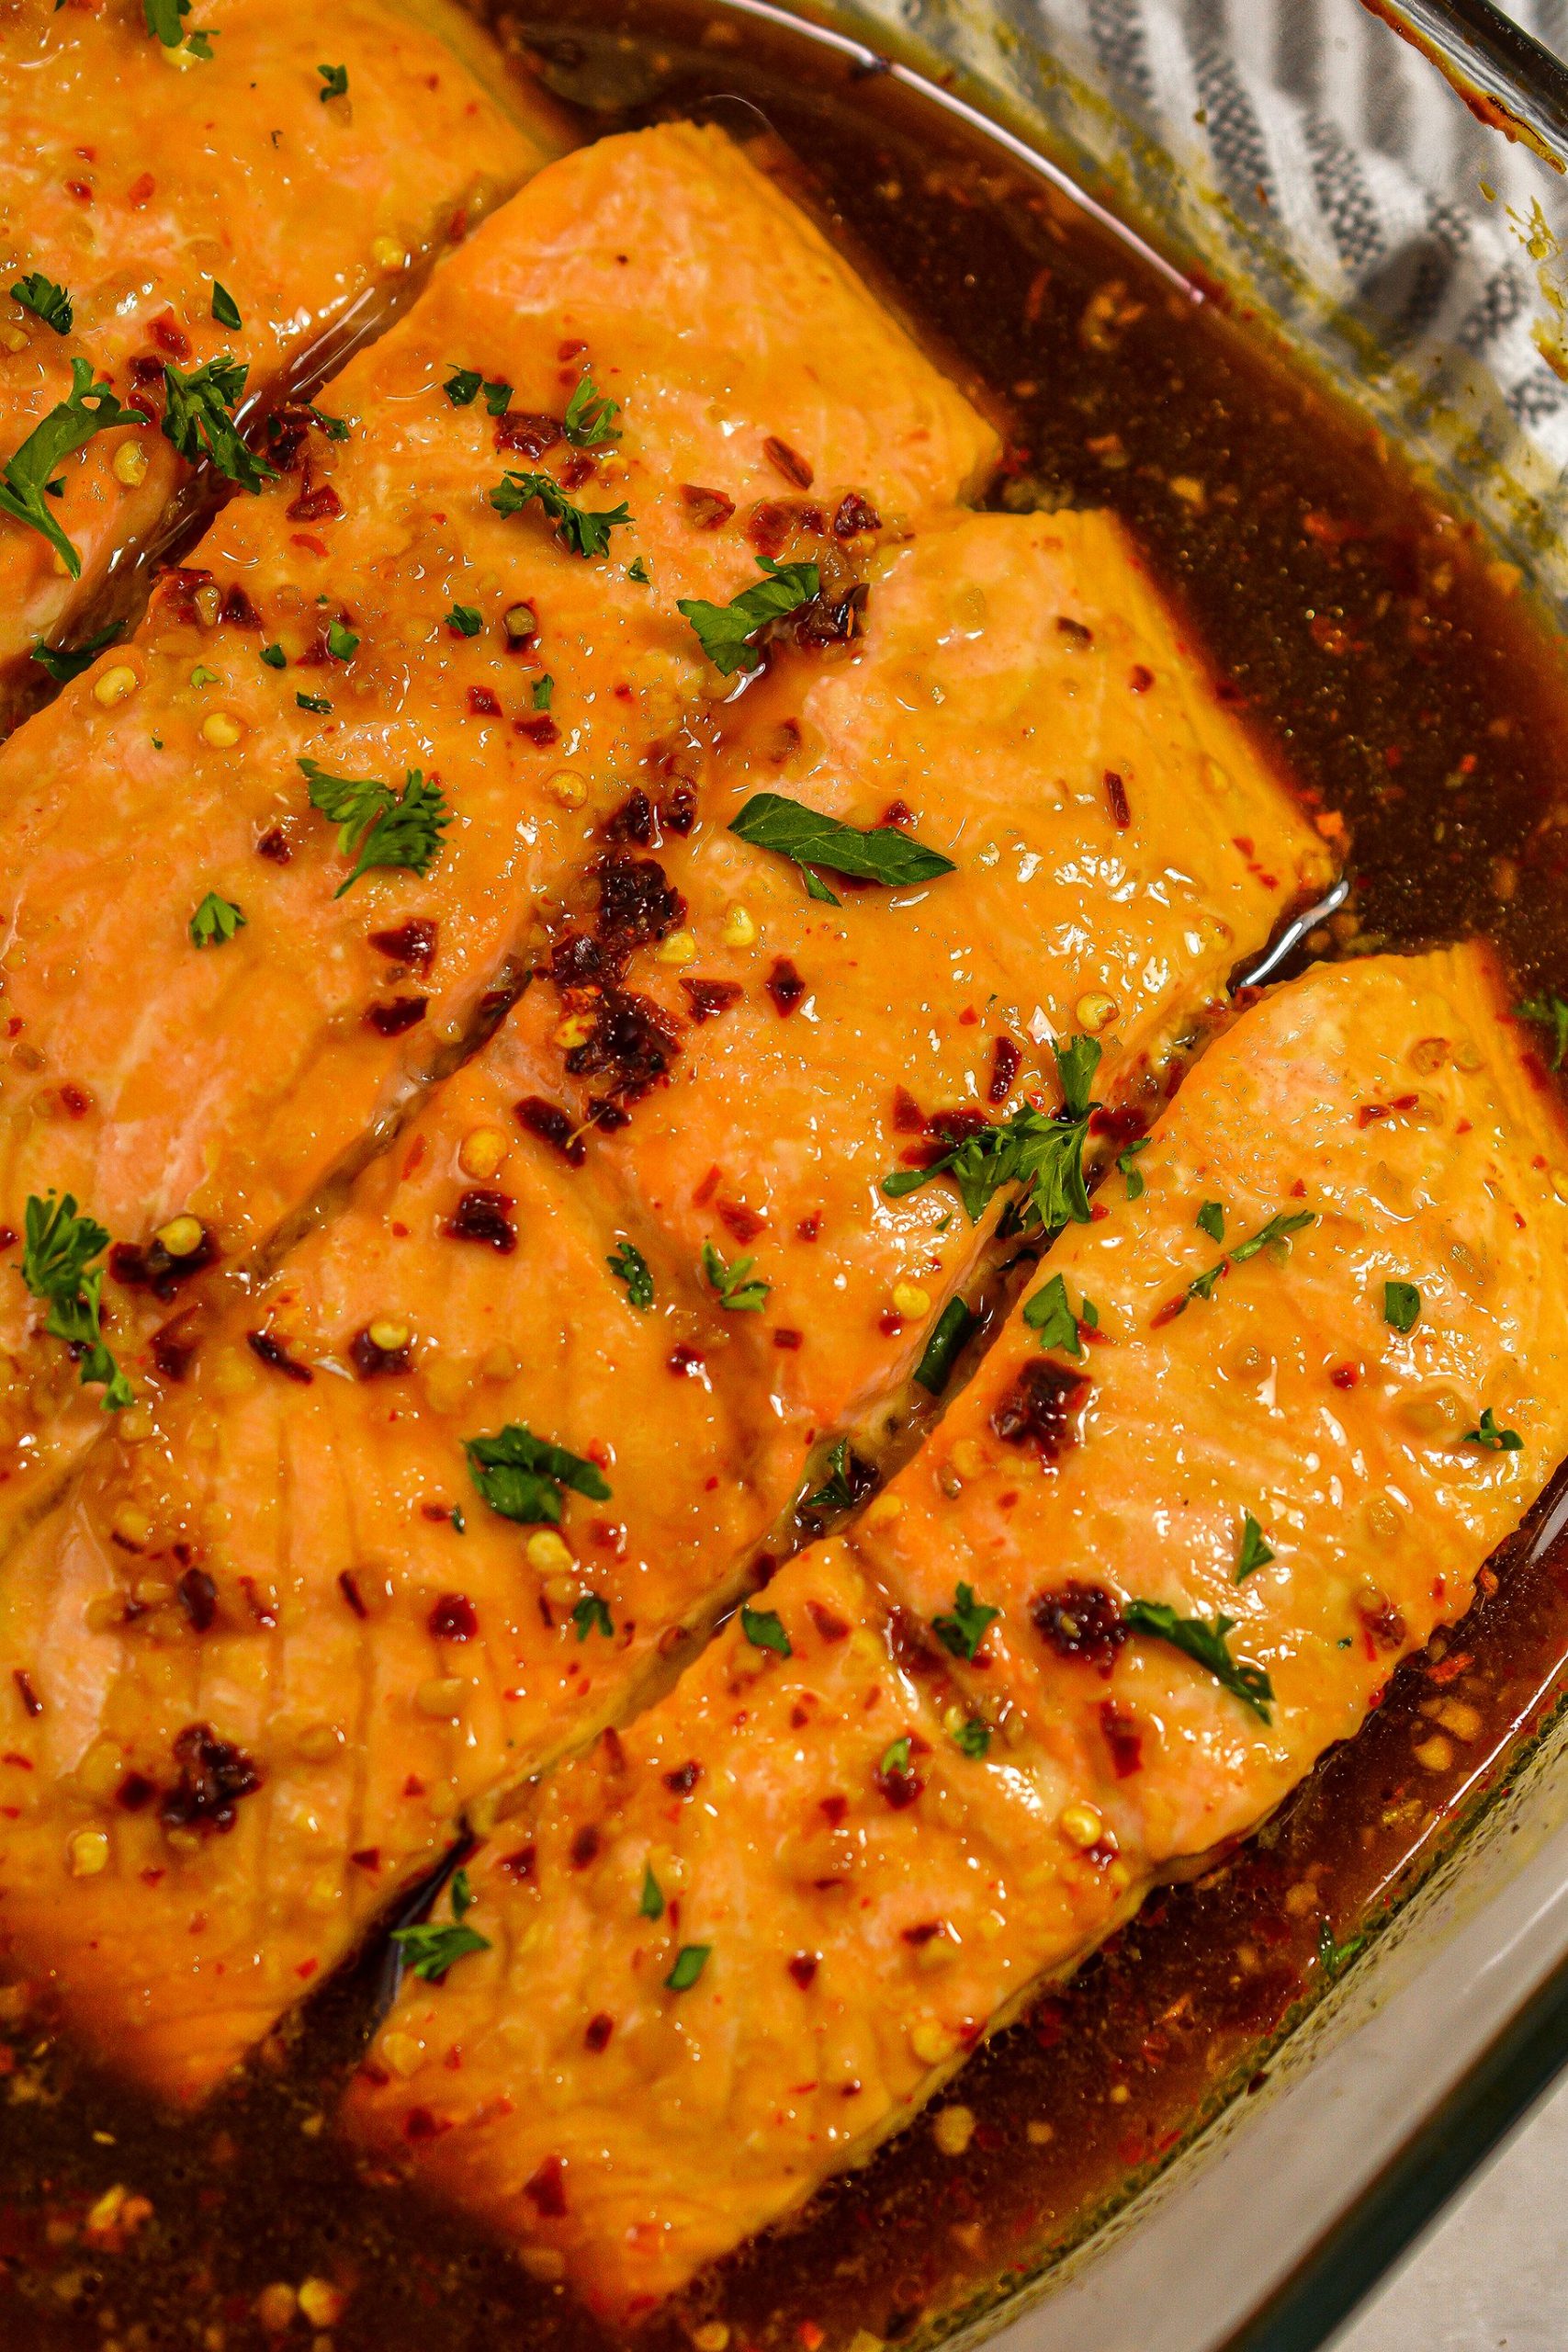  Spoon the sauce over the salmon and garnish with green onion and sesame seeds before serving.